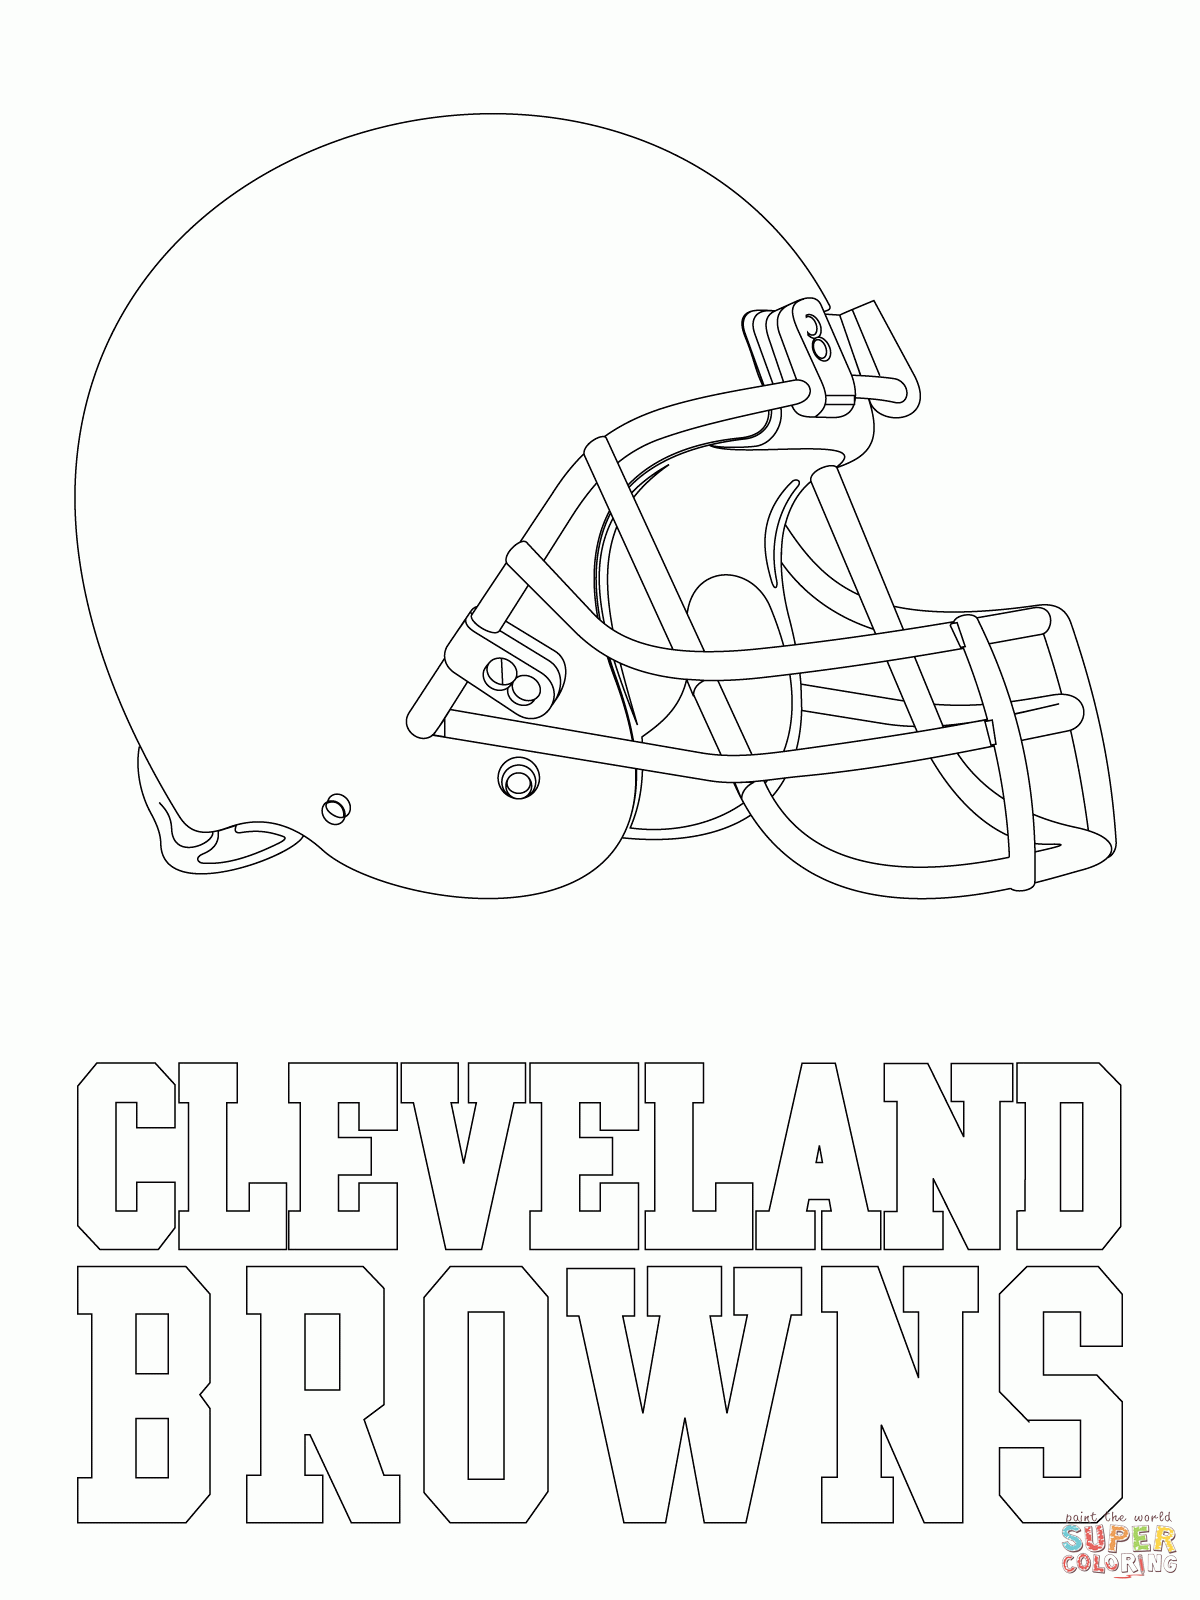 Cleveland Browns coloring page.